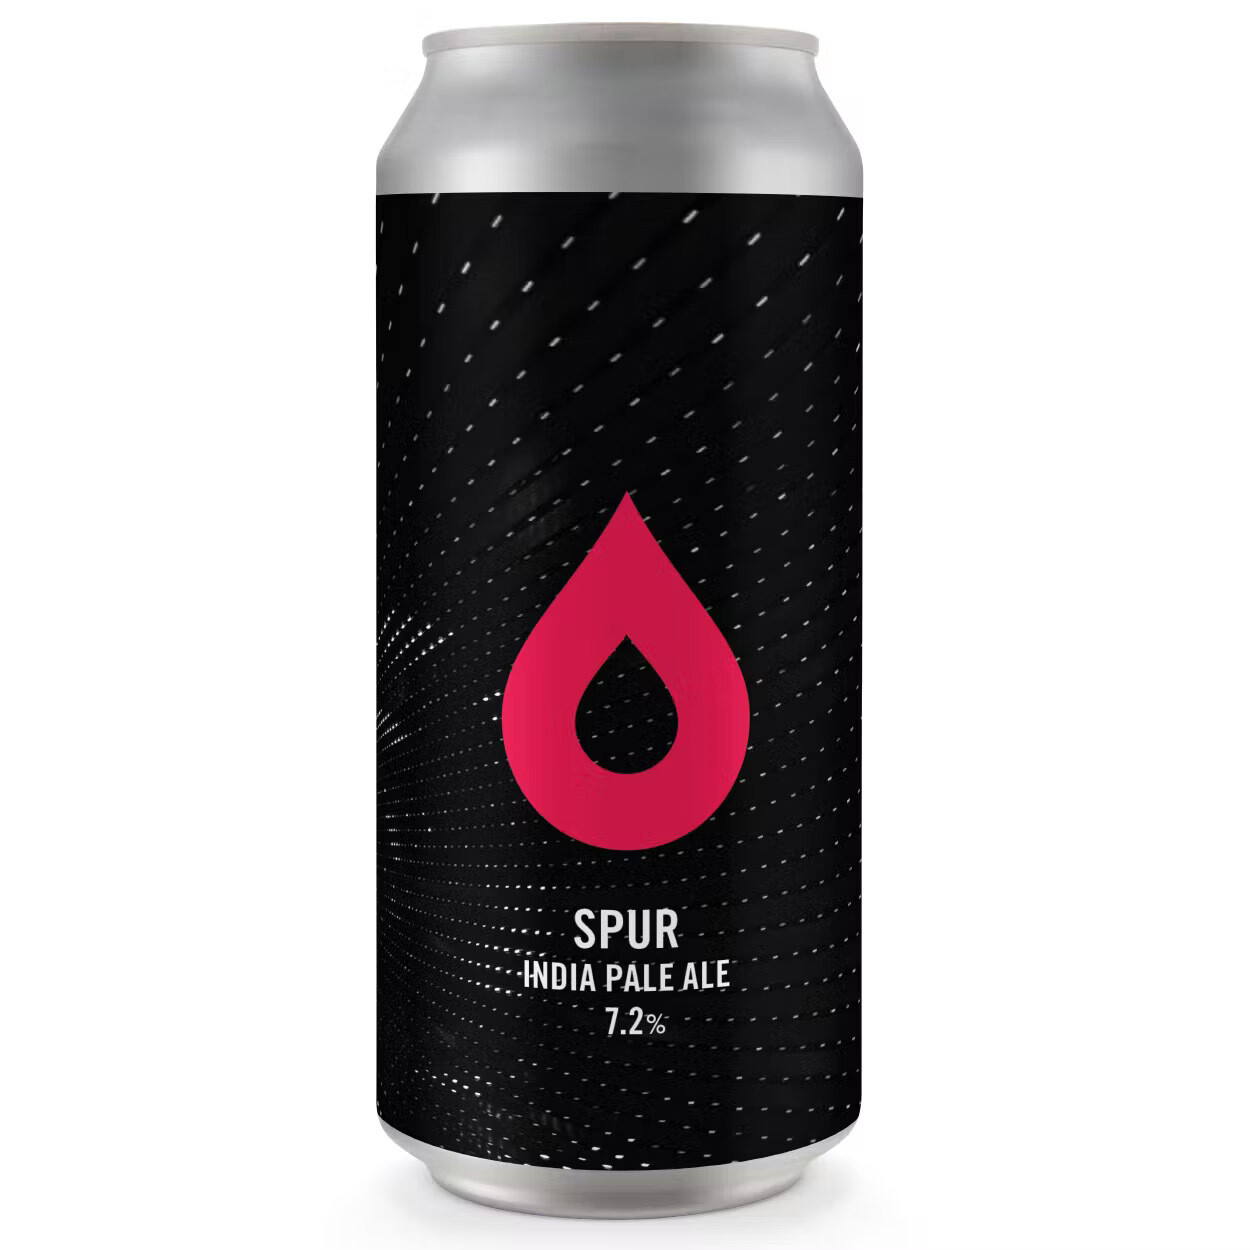 Polly's Spur IPA